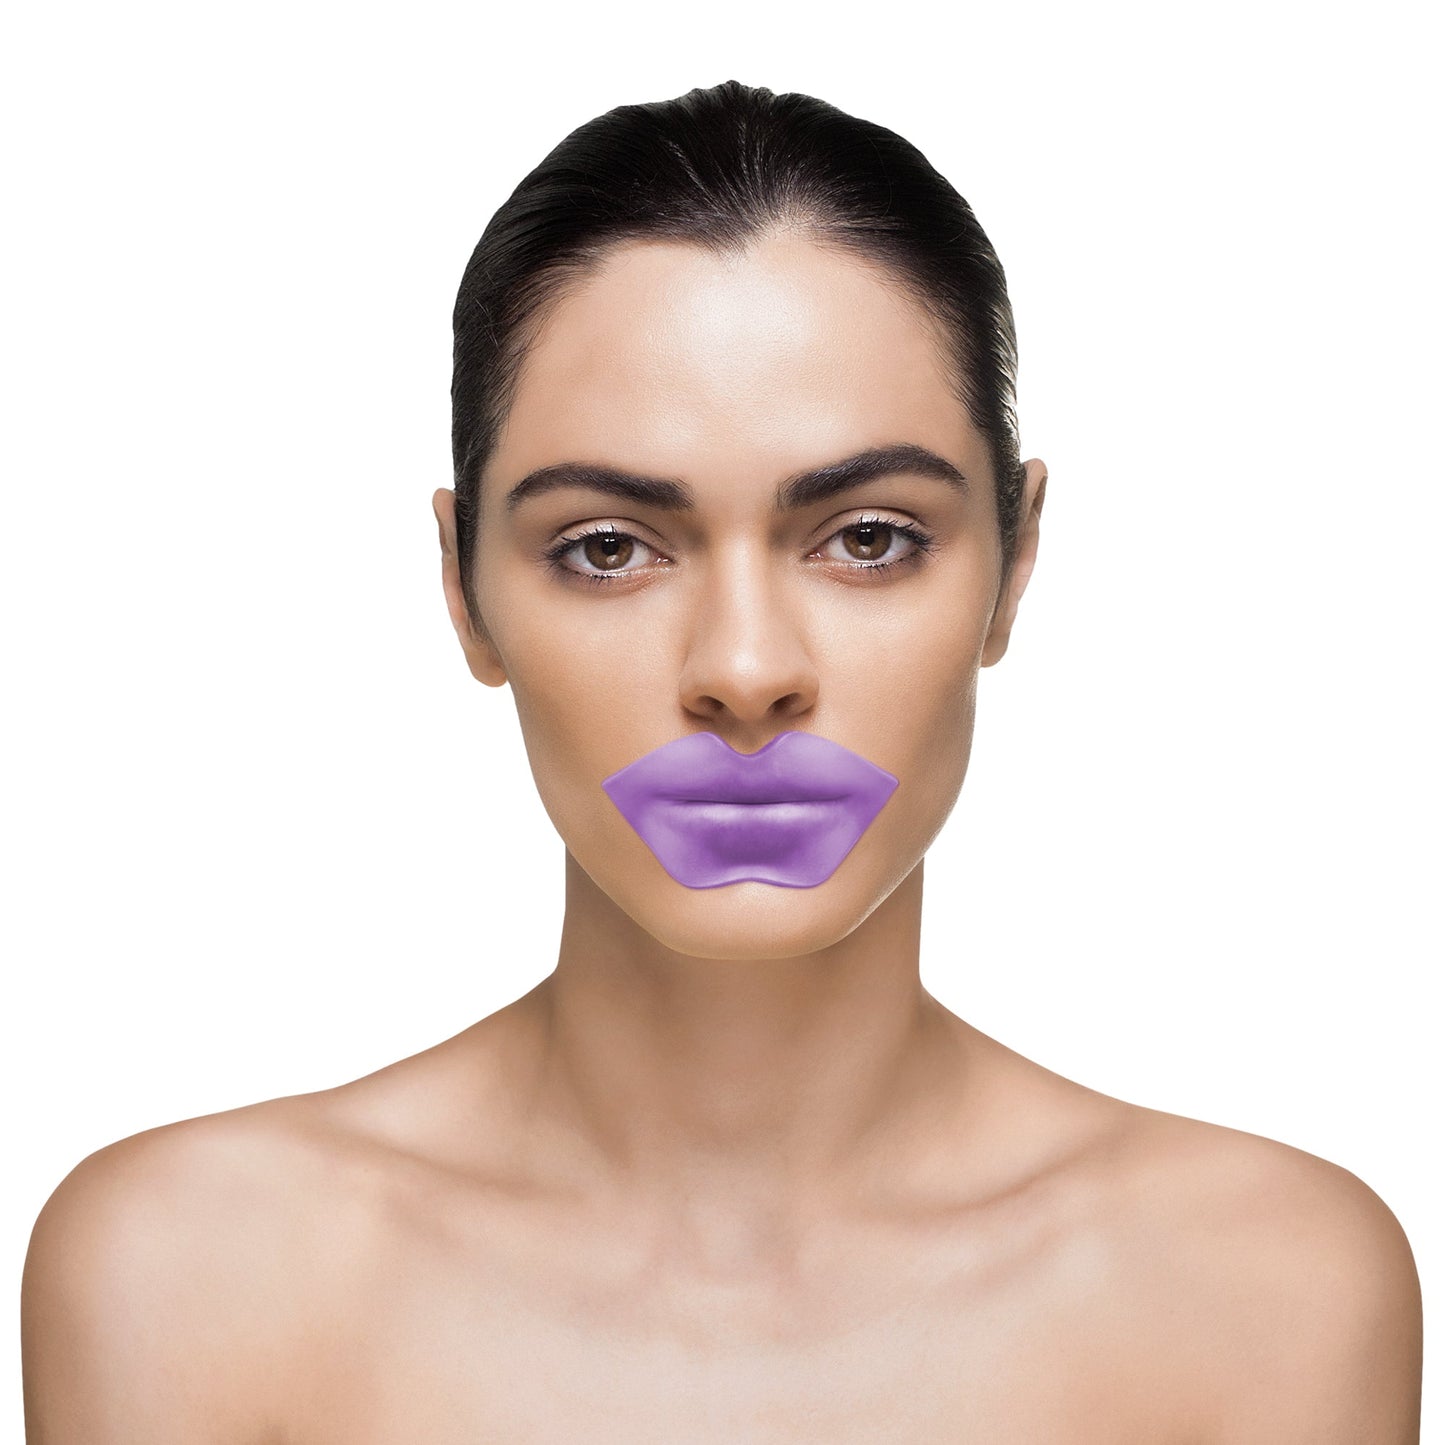 Buy Online Best Amethyst Lip Mask | Buy innovative clinical skincare products - TOPBODY